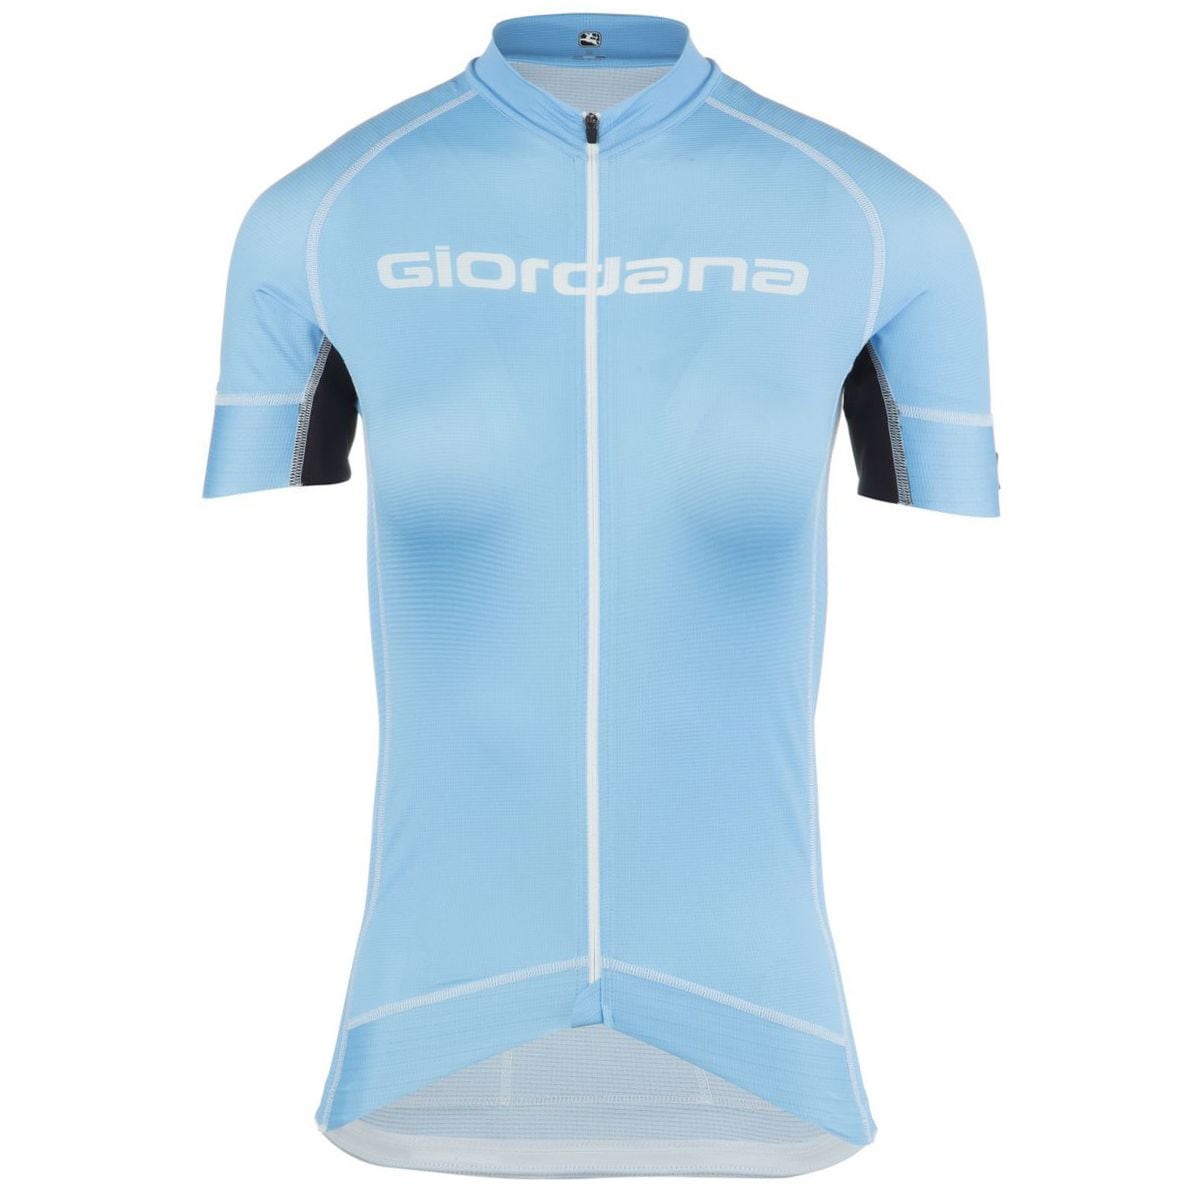 Giordana Trade FormaRed Carbon Jersey Women's